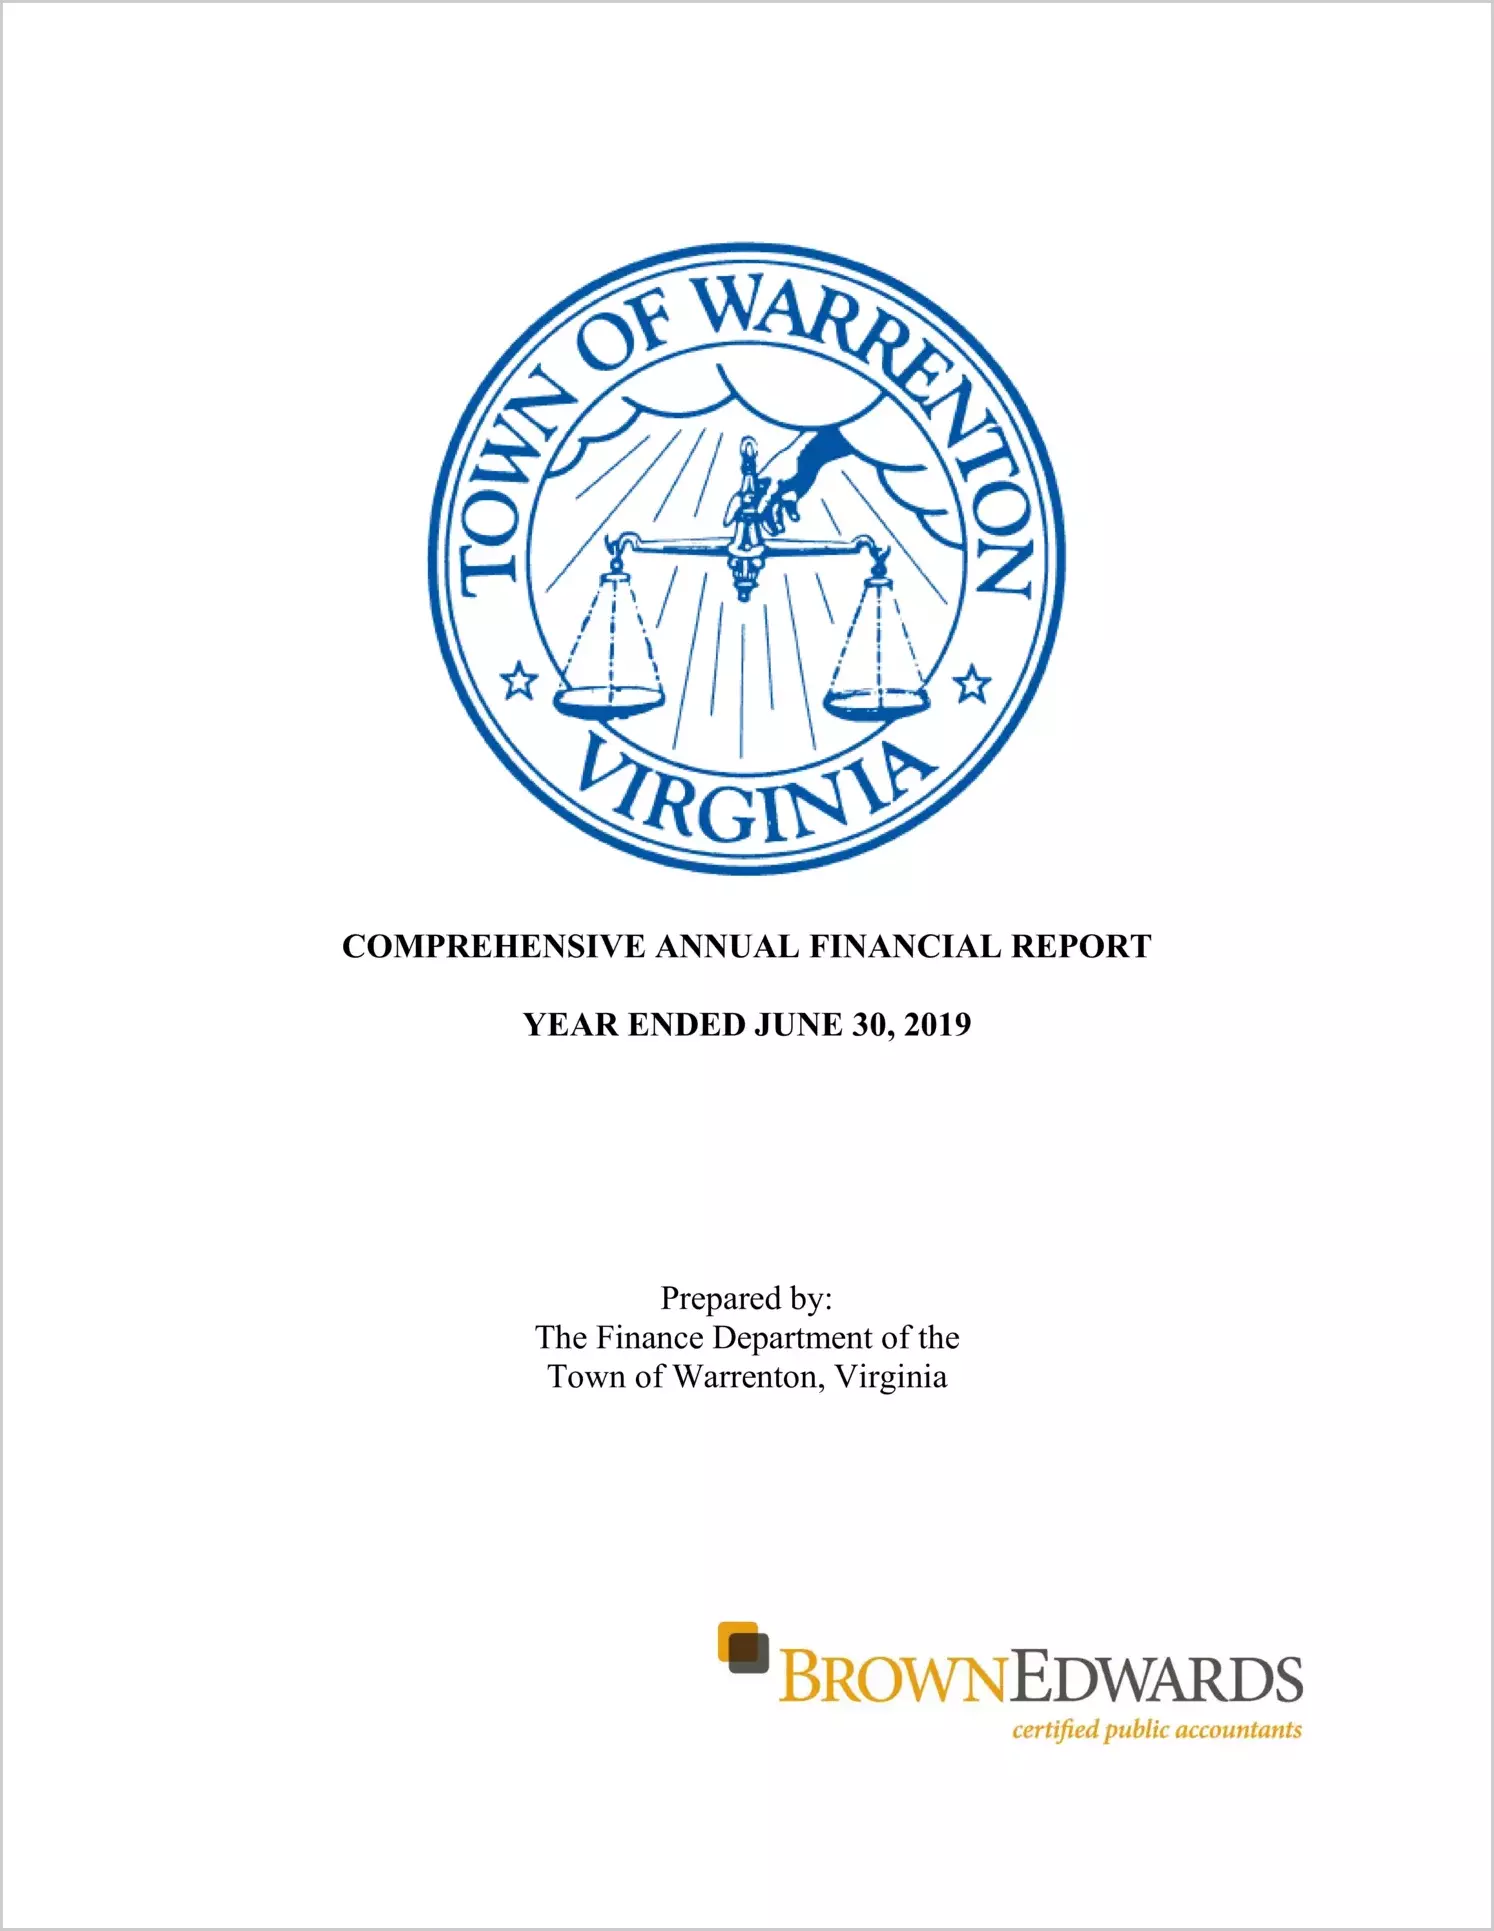 2019 Annual Financial Report for Town of Warrenton